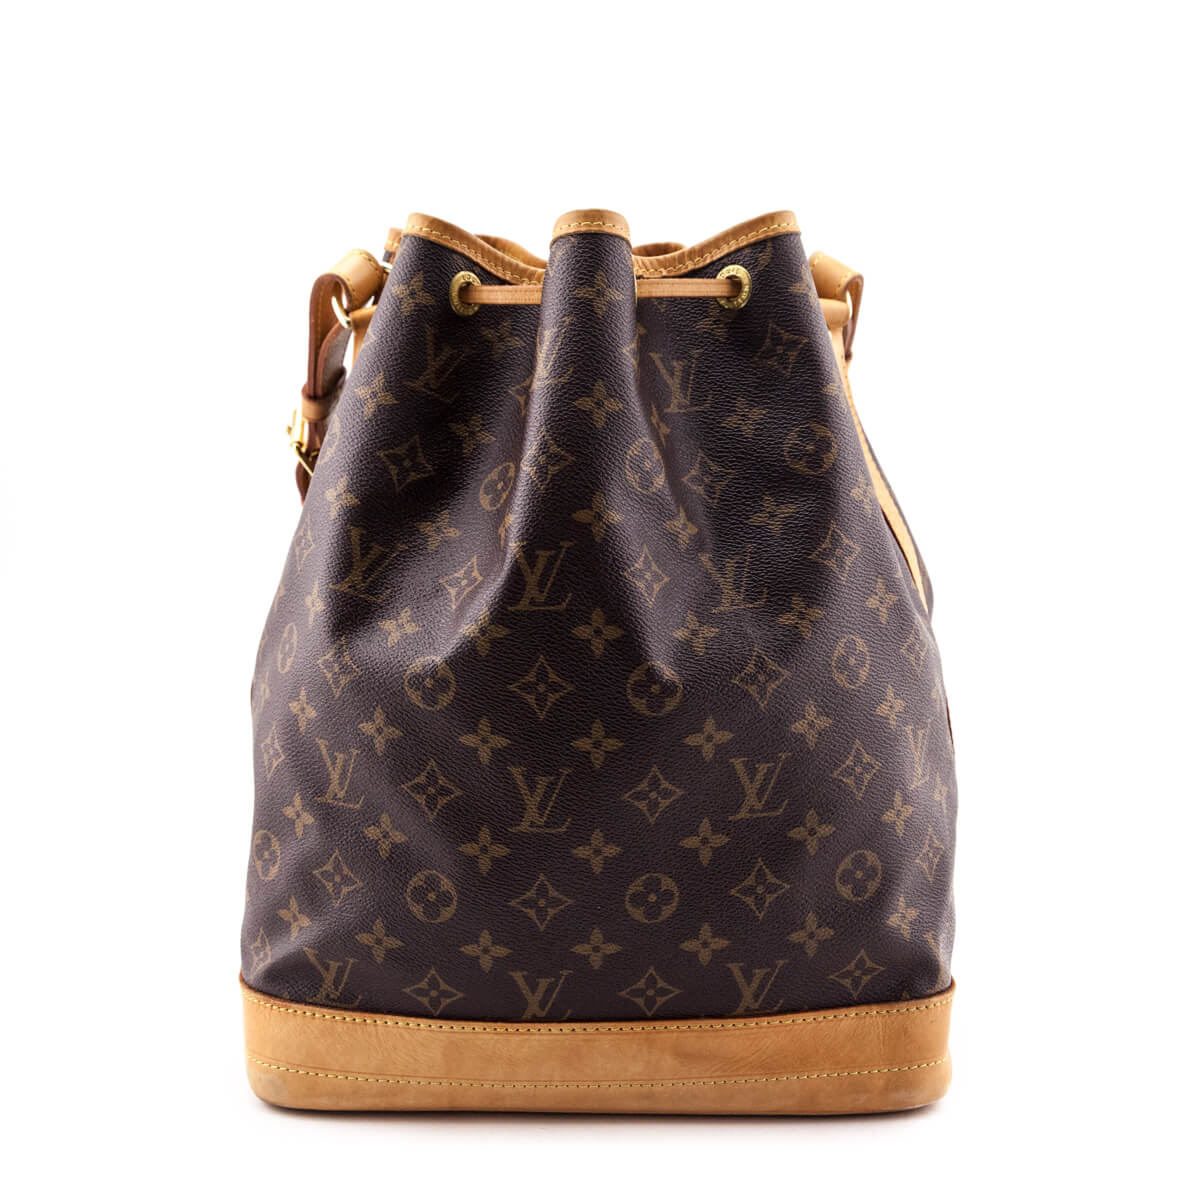 Louis Vuitton, Bags, Gently Used Authentic Lv Bucket Bag Thats Ready For  A New Home